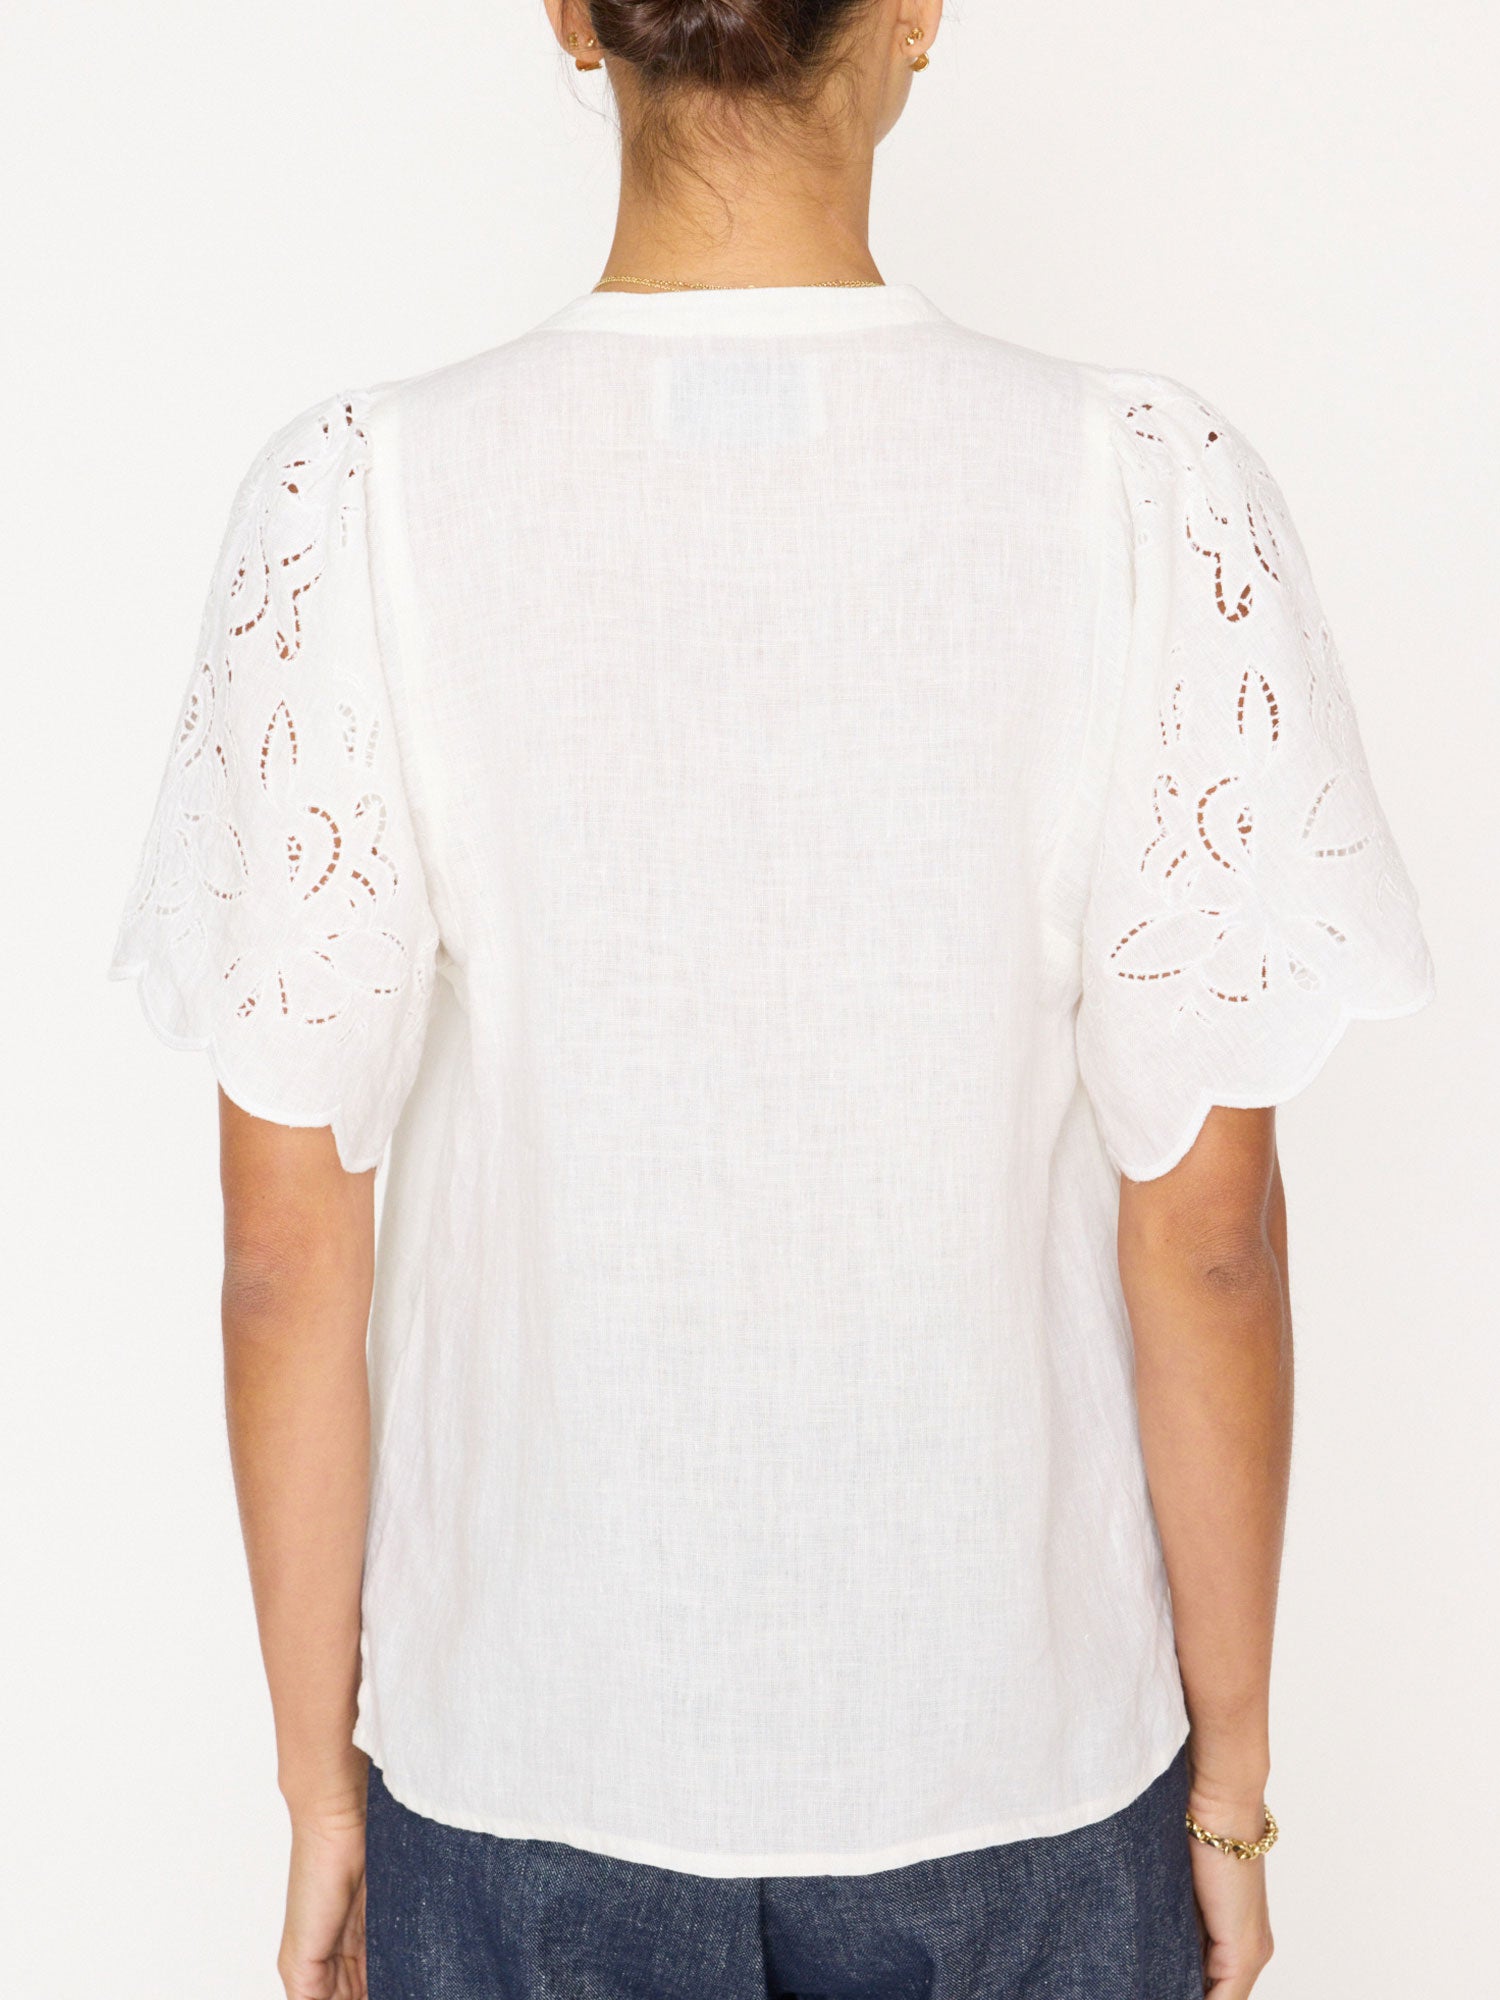 Shore linen embroidered sleeve white top back view